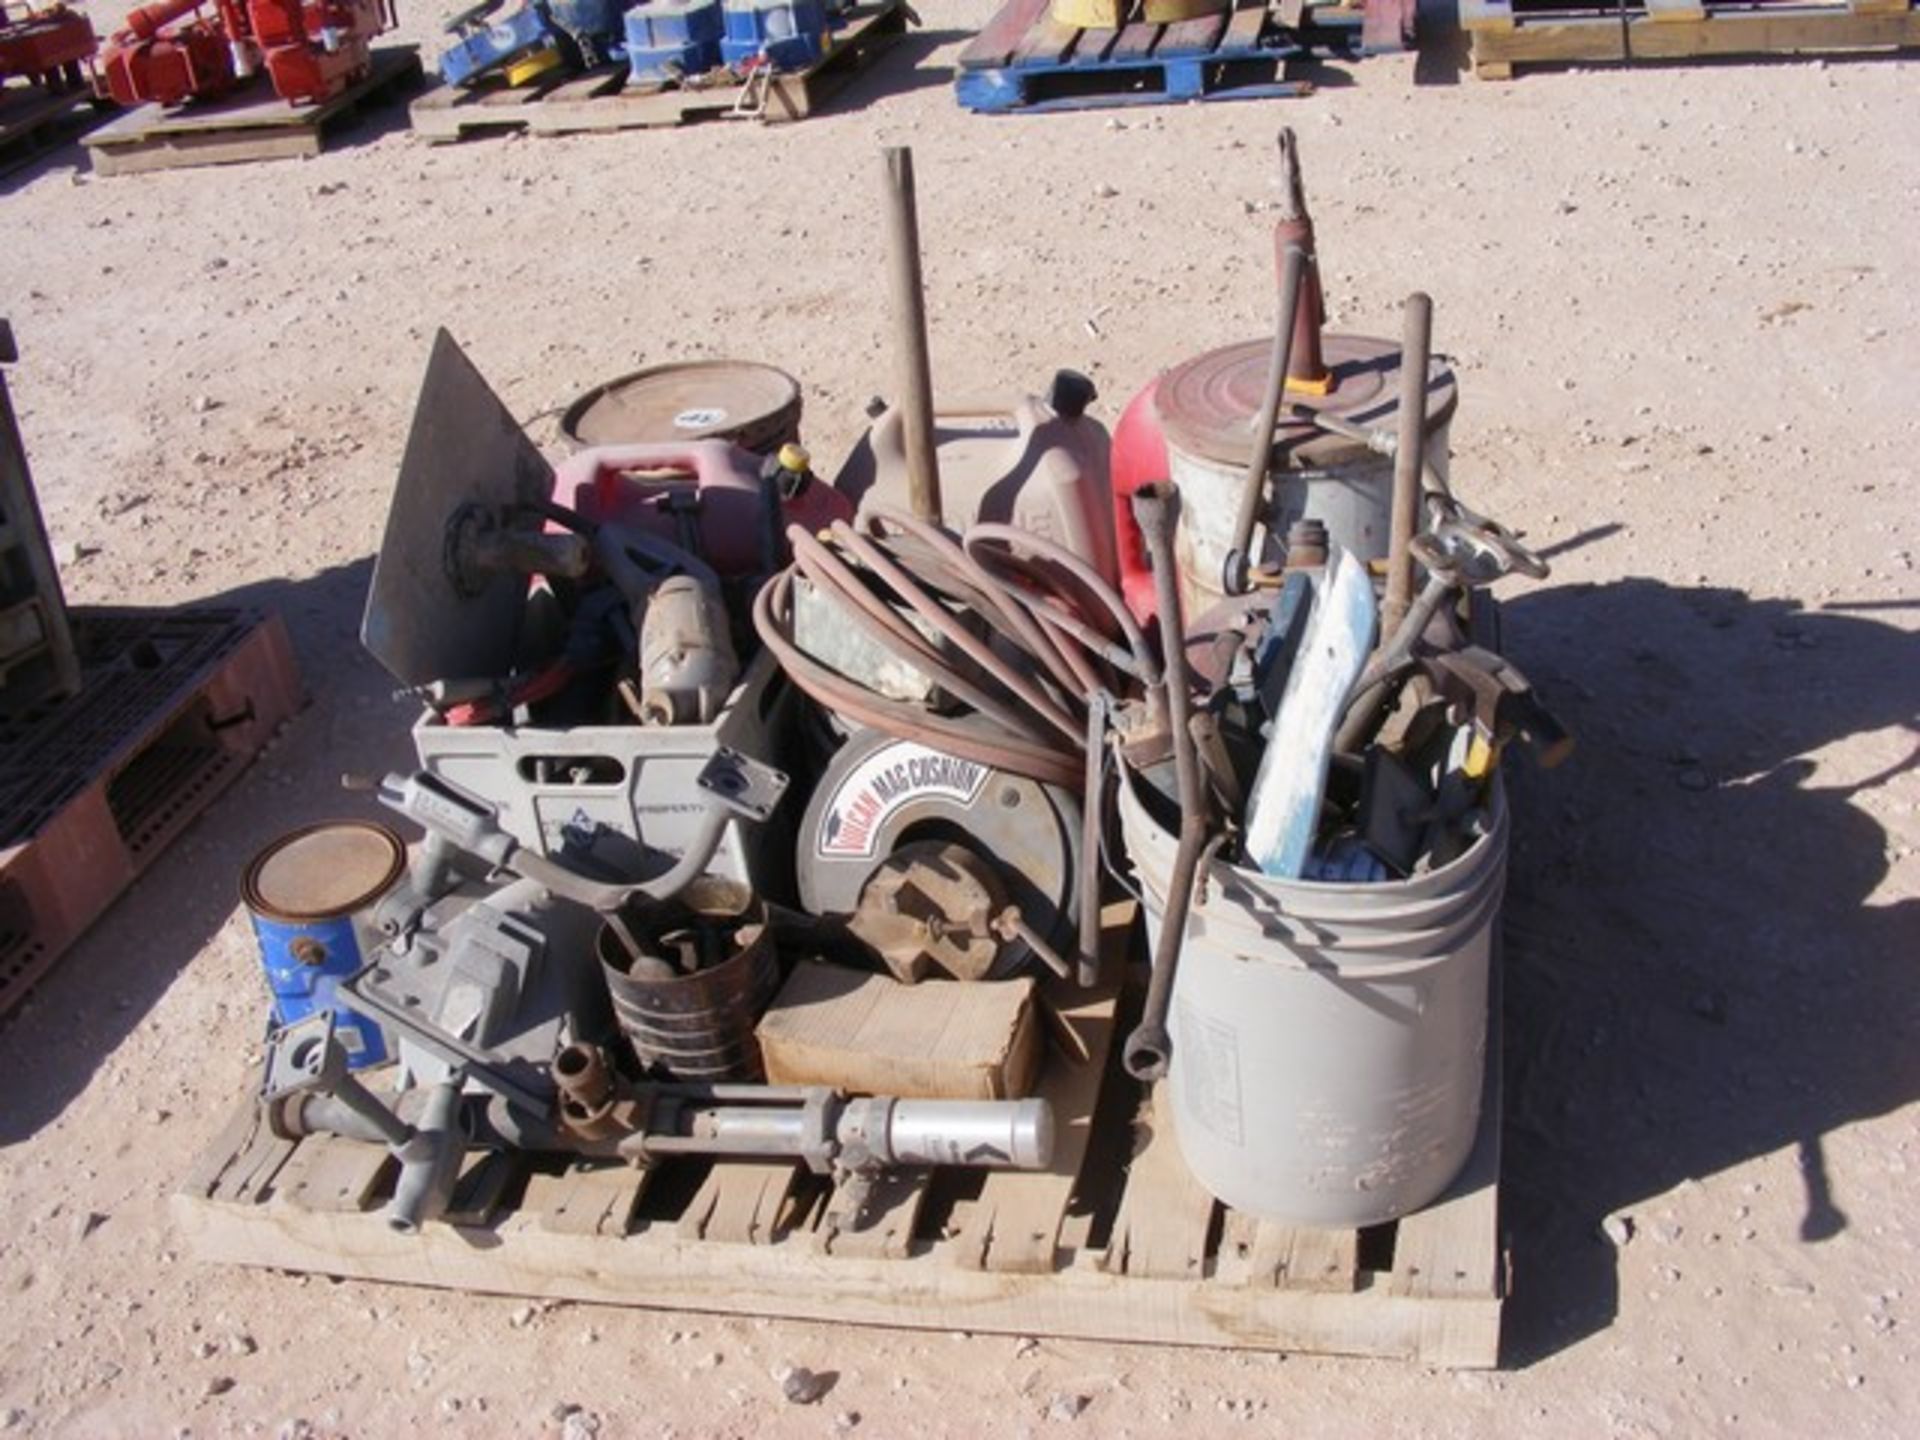 Located in YARD 1 - Midland, TX (9671) MISC GAS CANS, OIL CANS, AIR PUMPS, BRAKE BLEEDER, MISC TOOLS - Image 2 of 2